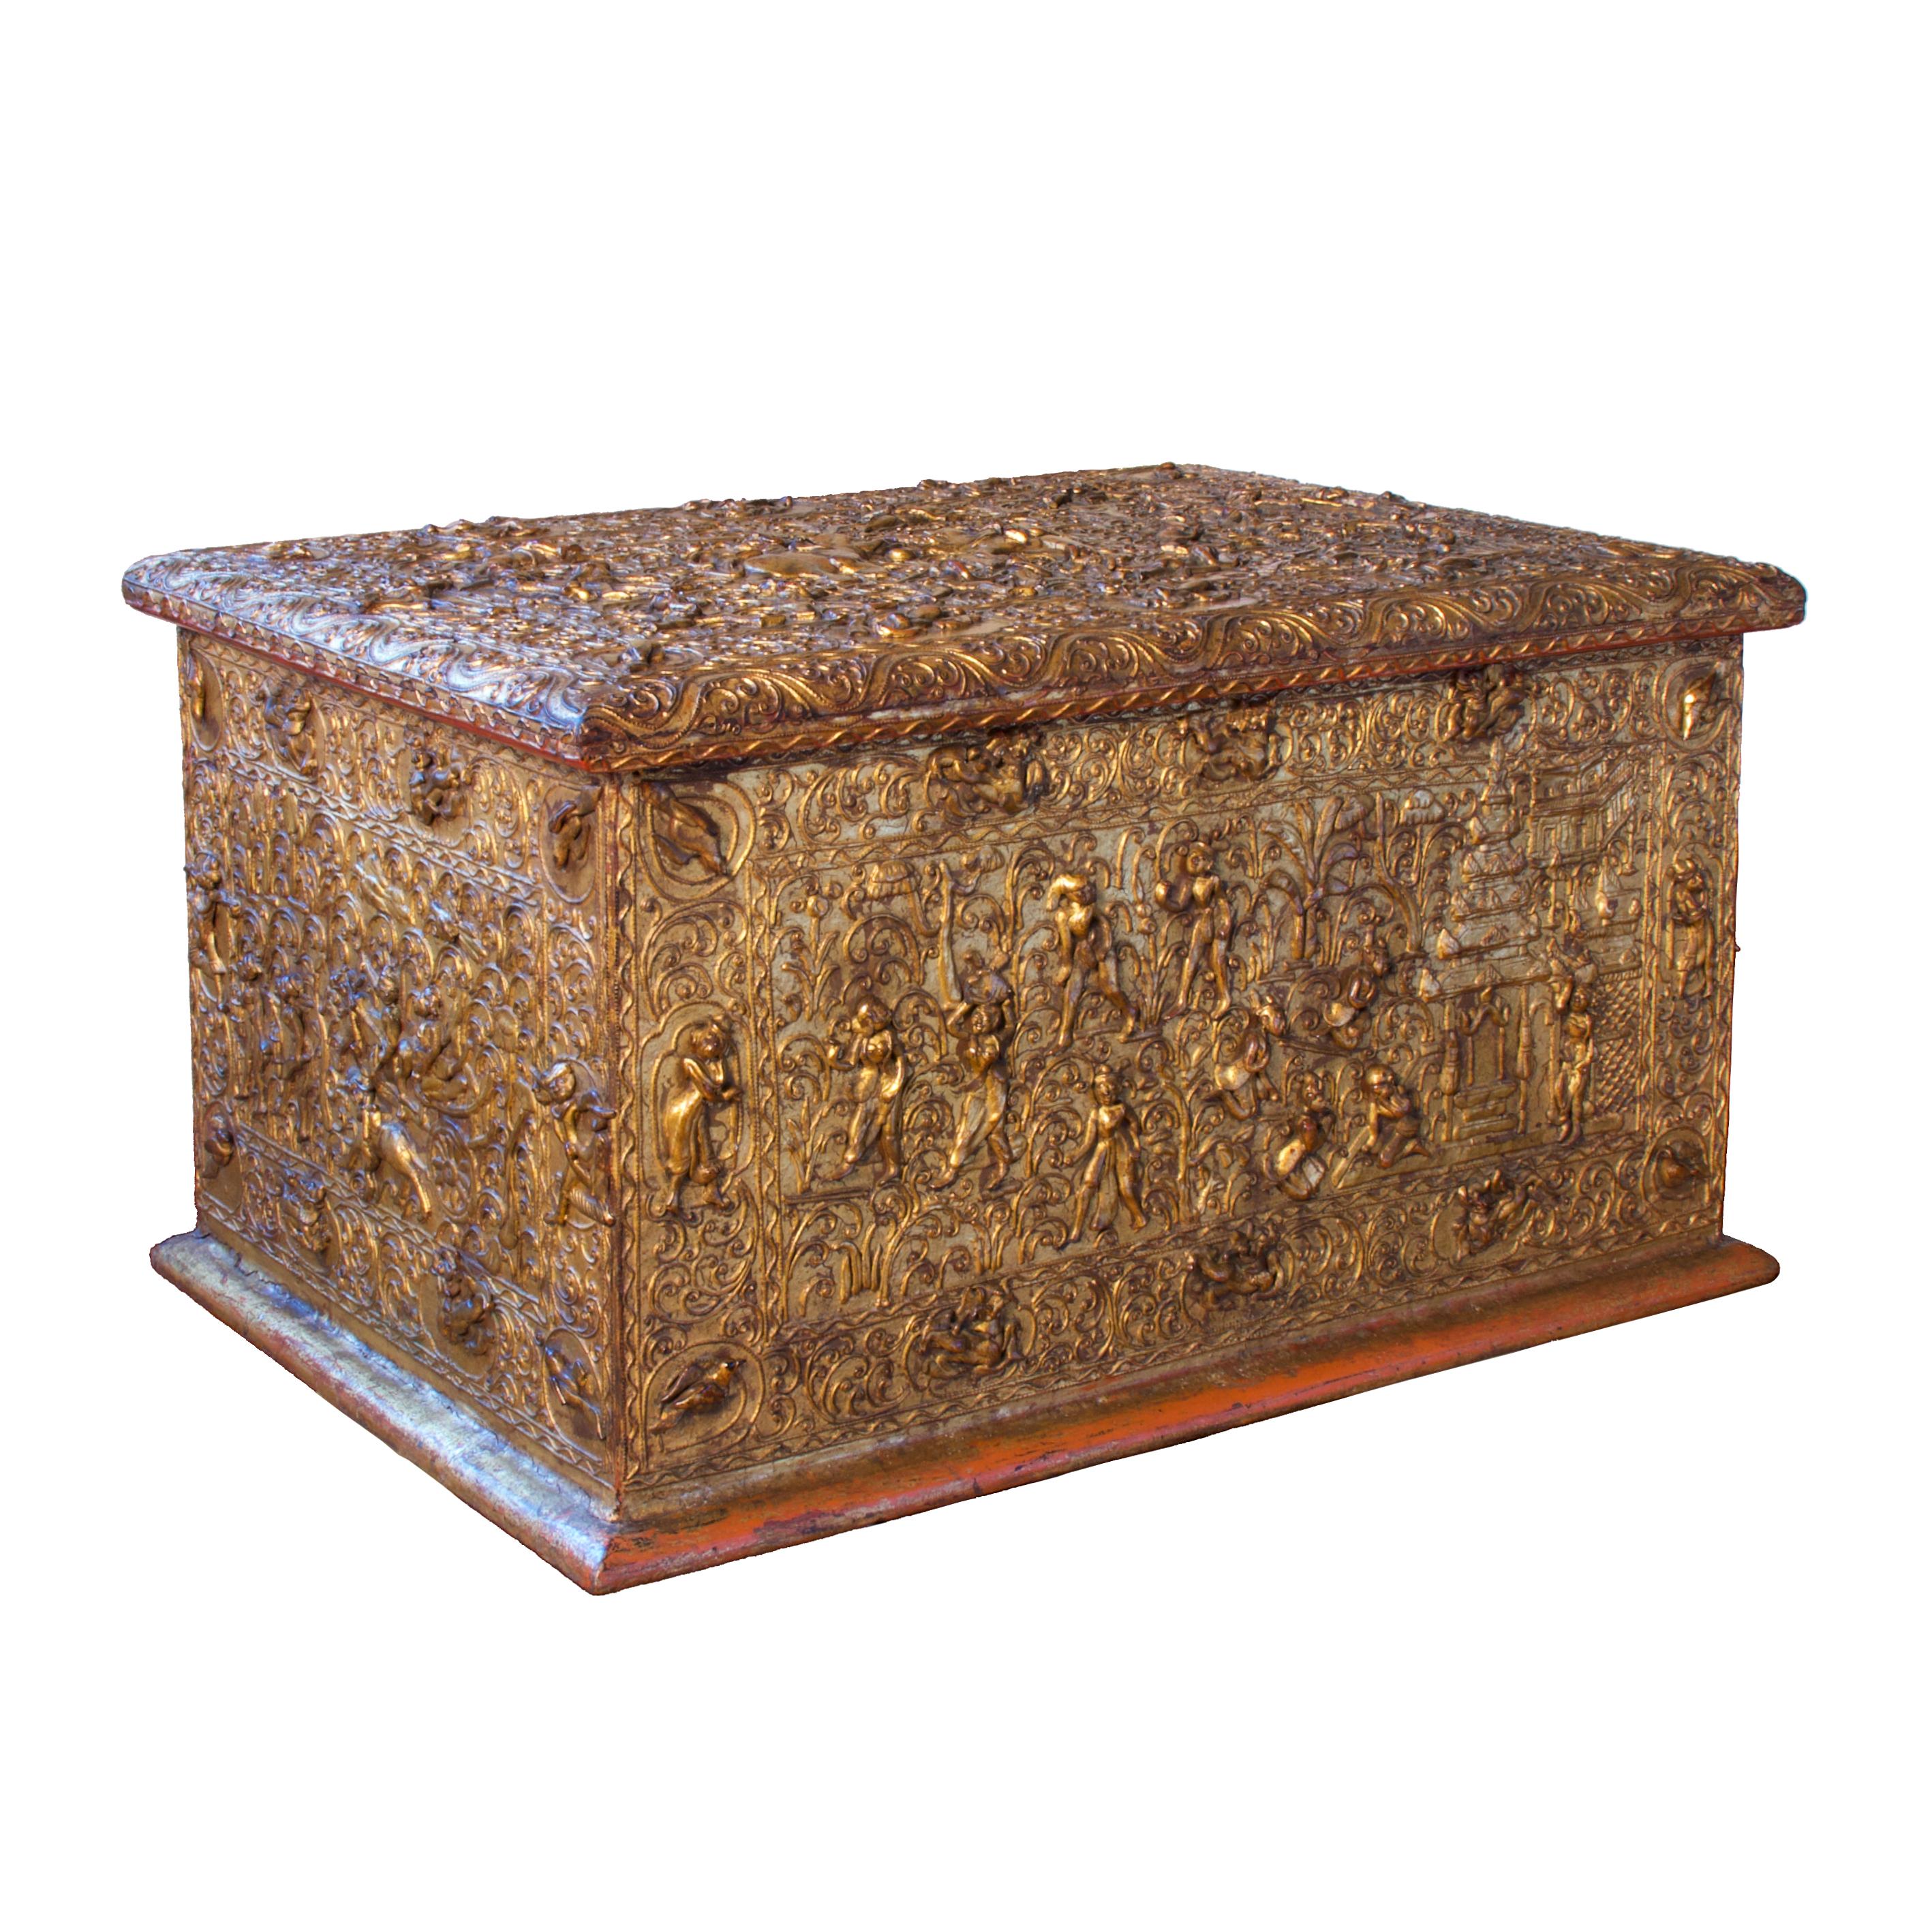 The chest is constructed of teak covered in lacquer and gold leaf with a hinged lid and detailed decoration on four sides. The high relief thayo lacquer depicts narrative scenes, bordered by a tendril vine frame with reserve cartouches of birds,